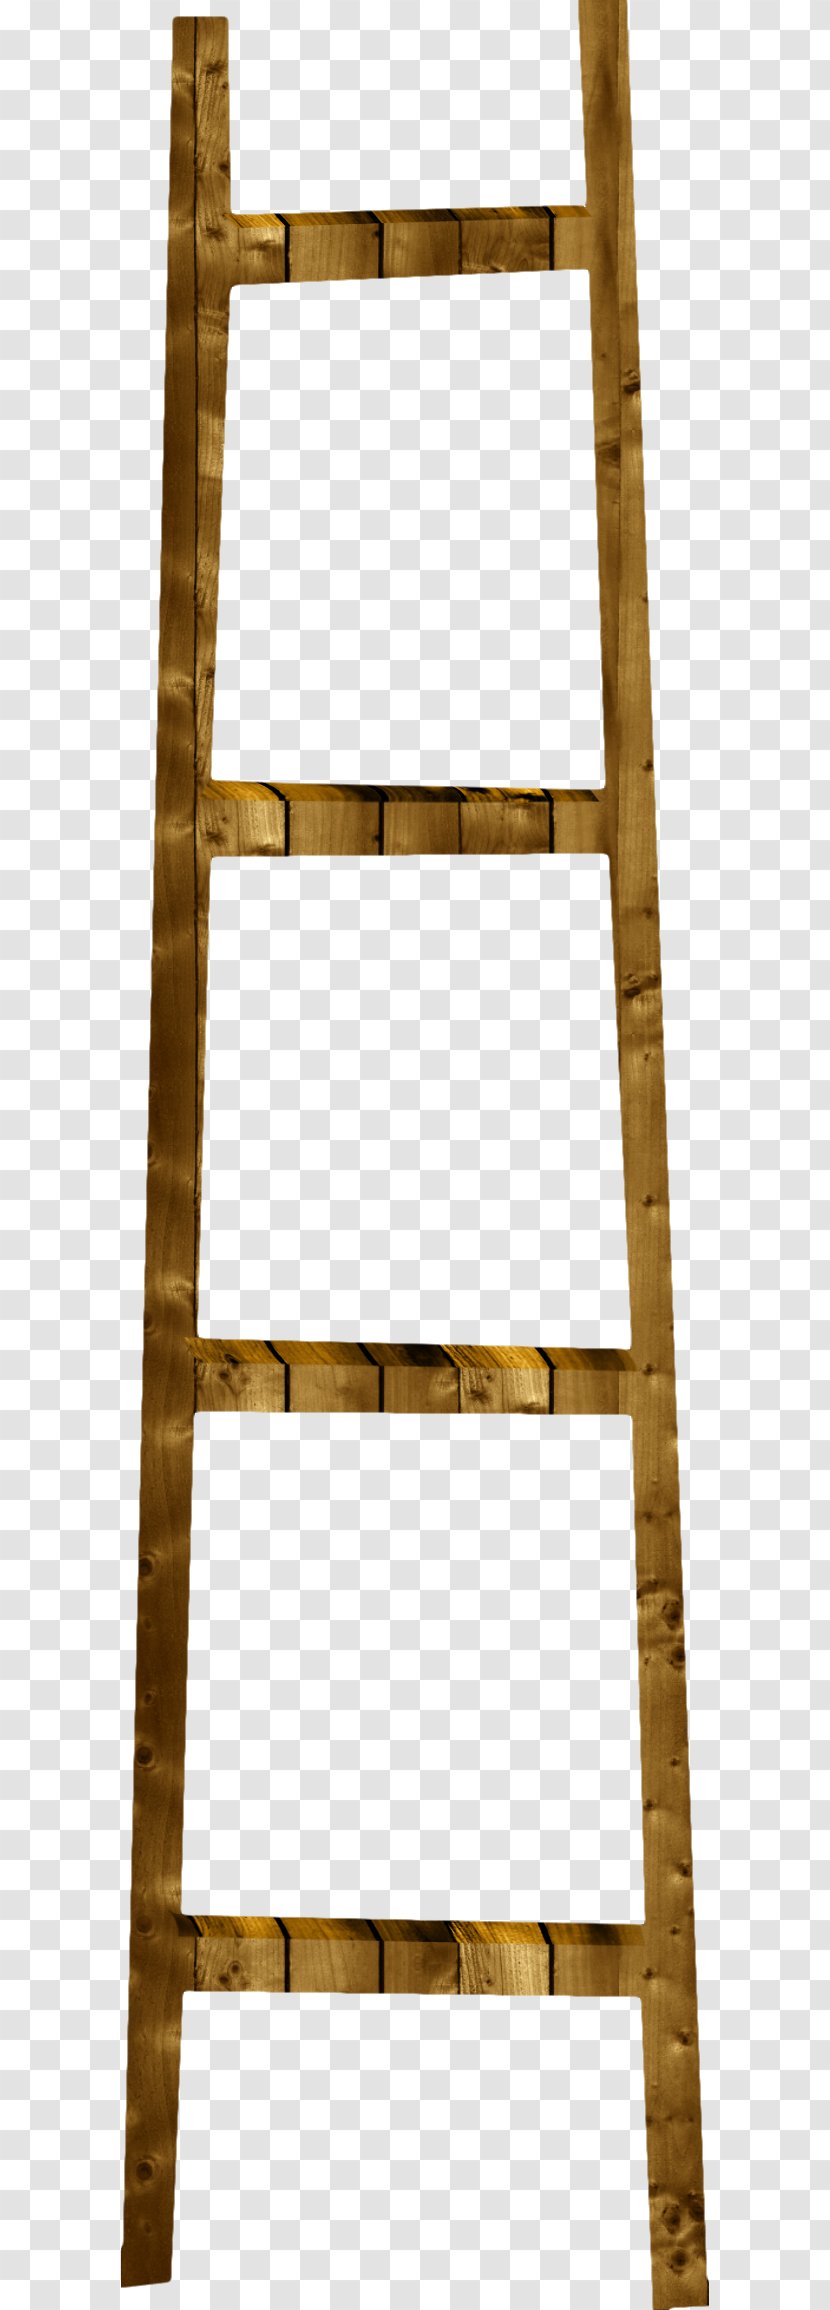 Wood Ladder Stairs - Ladders Transparent PNG